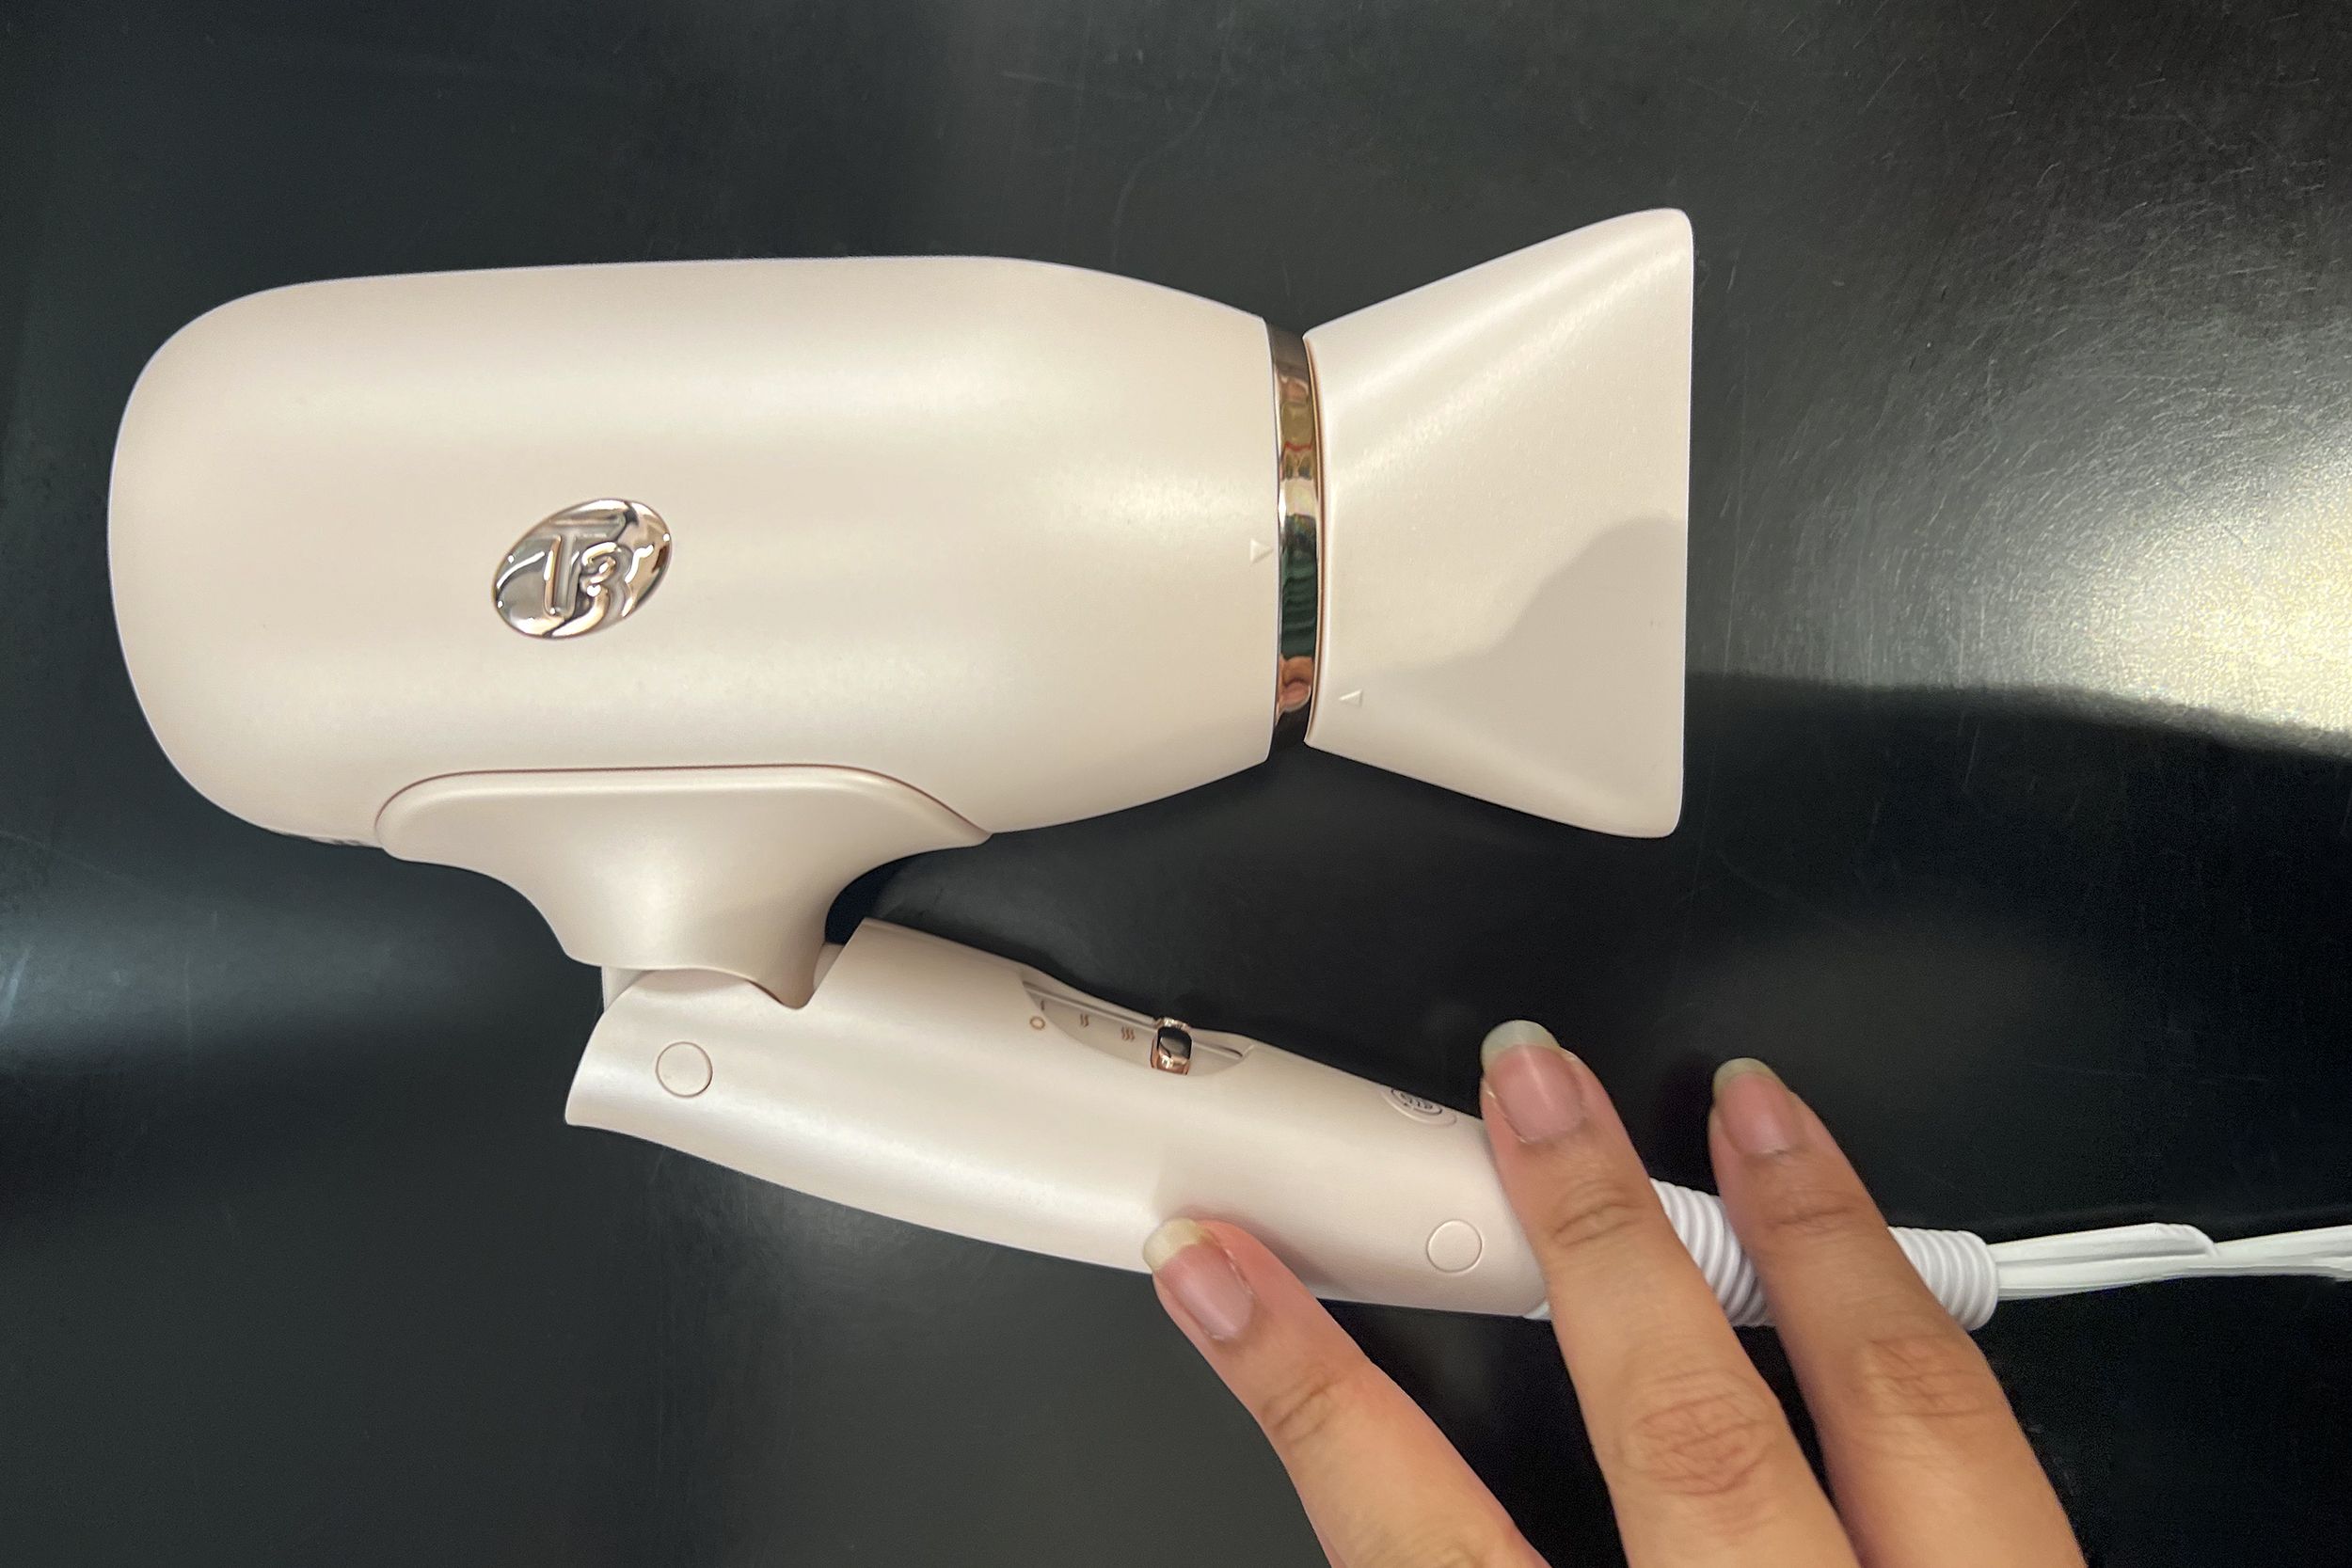 Compact Folding Hair Dryer - Featherweight - Soft Pink